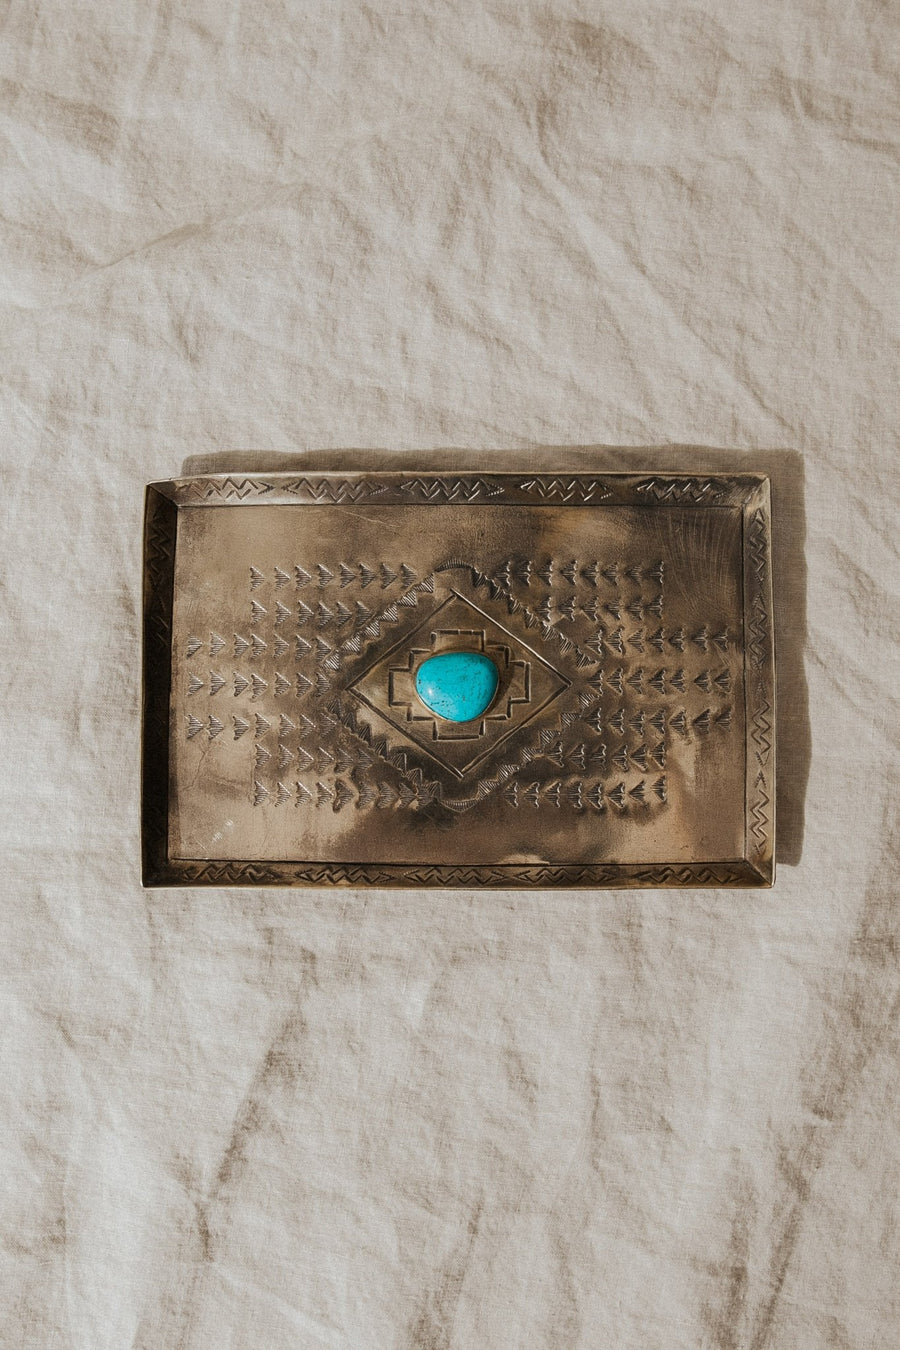 J. Alexander Objects Silver / FINAL SALE Turquoise Treasure Tray